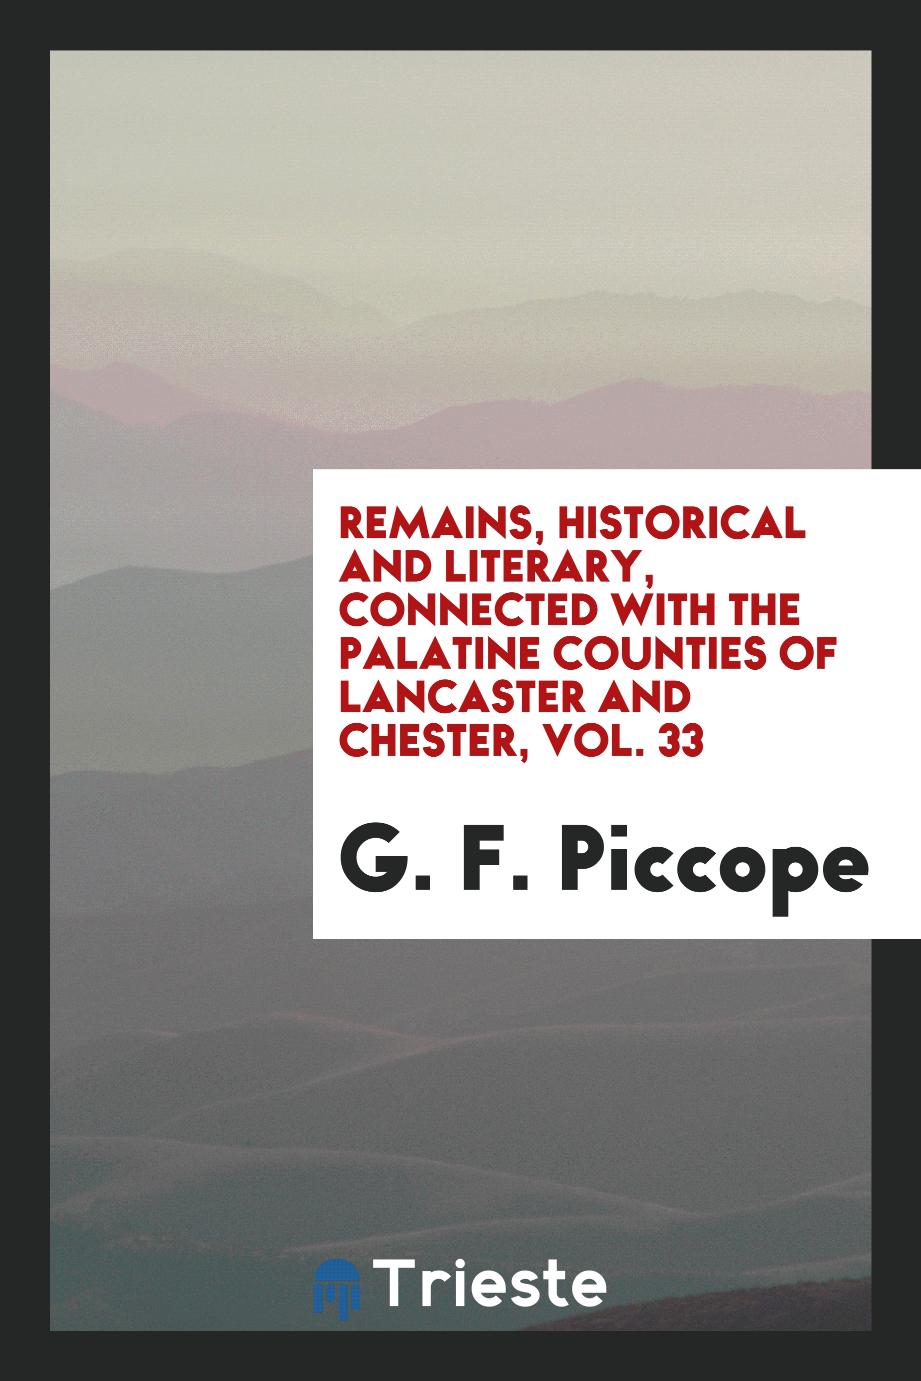 Remains, Historical and Literary, Connected with the Palatine Counties of Lancaster and Chester, Vol. 33